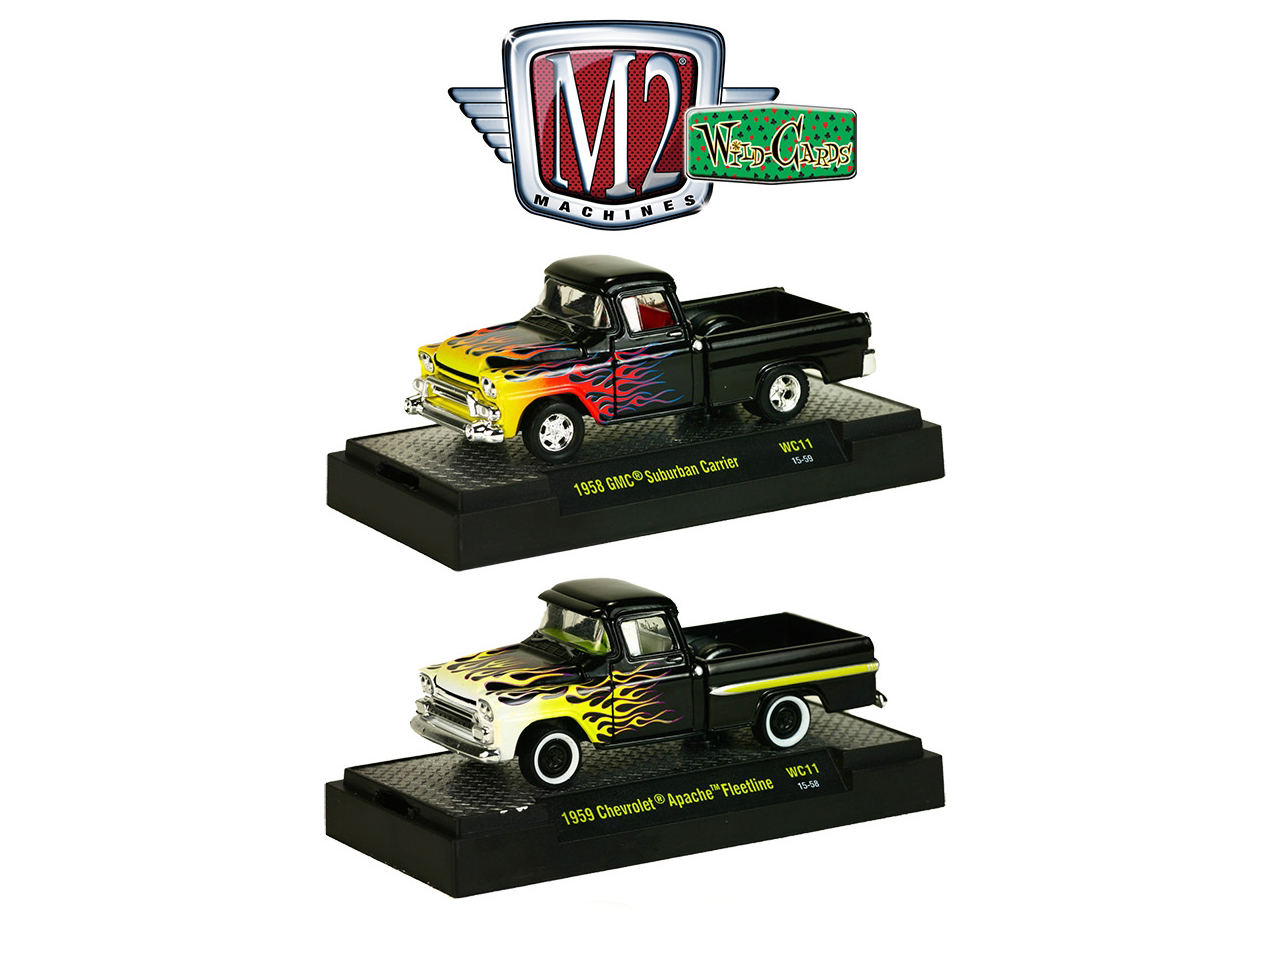 Wild Cards 1958 GMC Suburban Carrier Pickup Truck and 1959 Chevrolet Apache Fleetline Pickup Truck Set of 2 WITH CASES 1/64 Diecast Models by M2 Machines